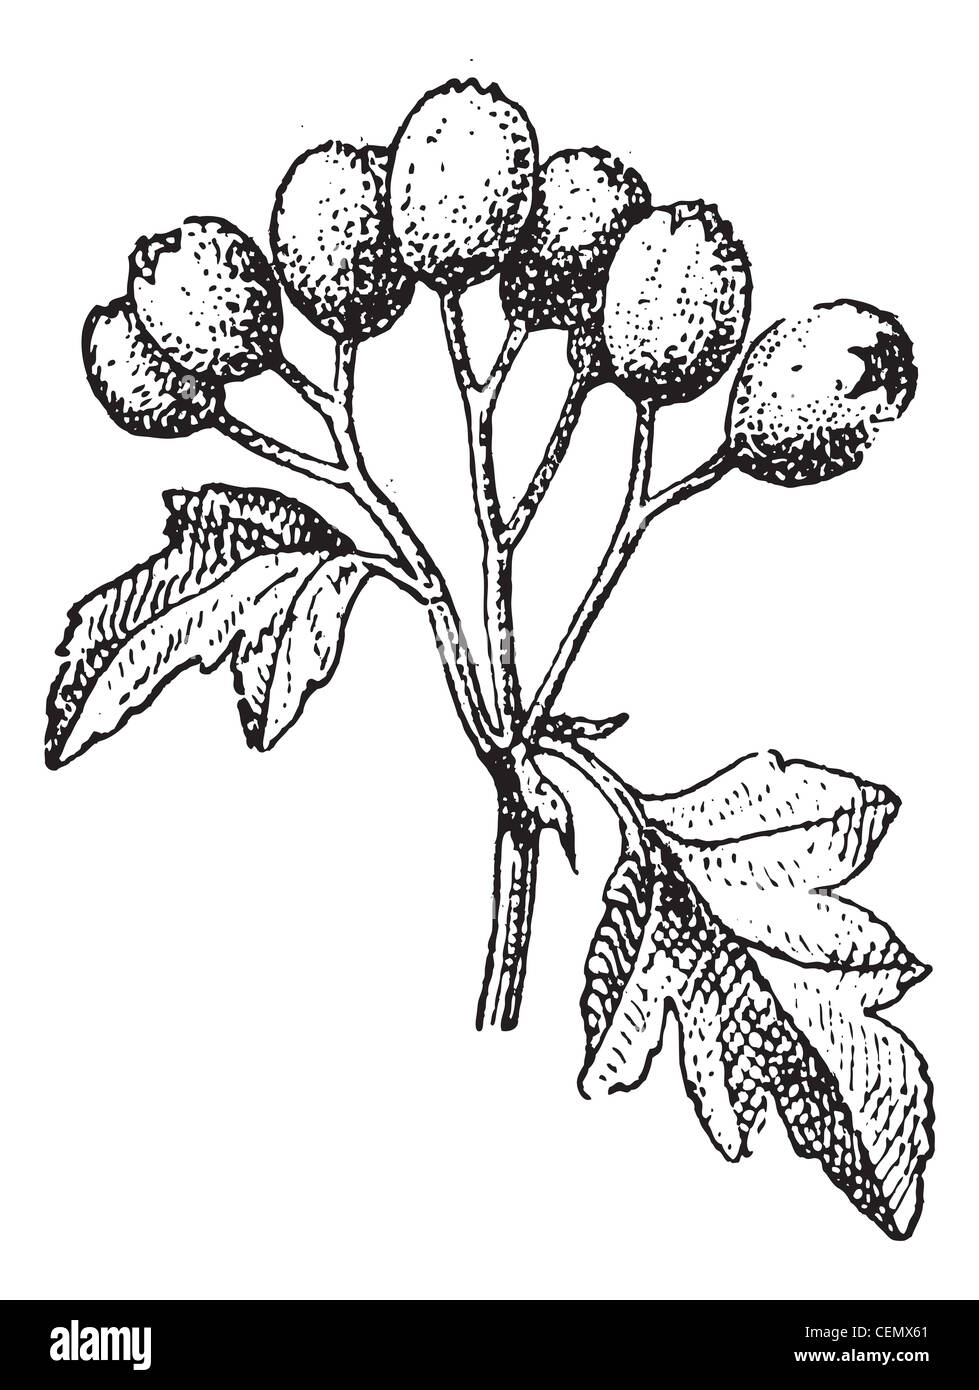 Old engraved illustration of Common hawthorn or Crataegus monogyna or single-seeded hawthorn or may or mayblossom or maythorn or quickthorn or whitethorn or motherdie or haw isolated on a white background. Dictionary of words and things - Larive and Fleury ? 1895 Stock Photo